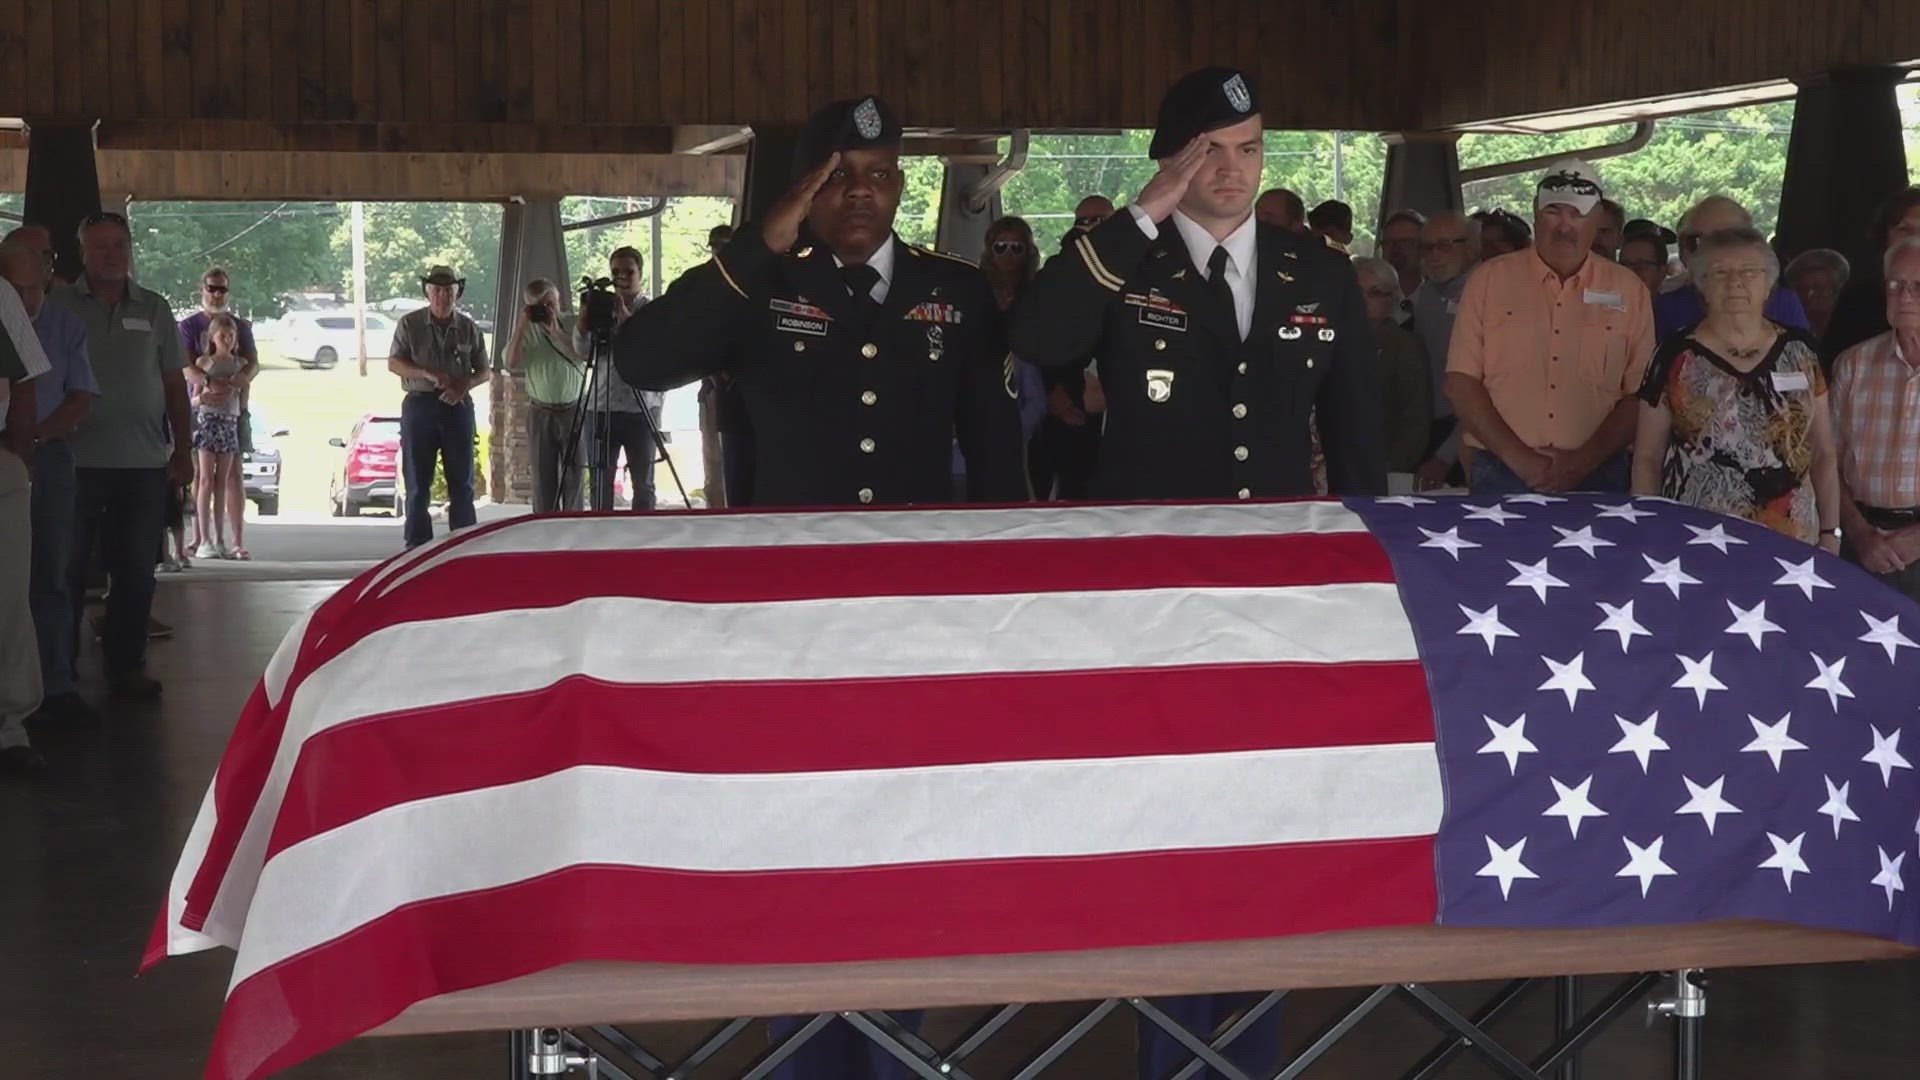 Joe Vinyard lost his life in Germany fighting in World War II. 79 years later, the East Tennessee veteran was finally buried with a ceremony in Maryville.